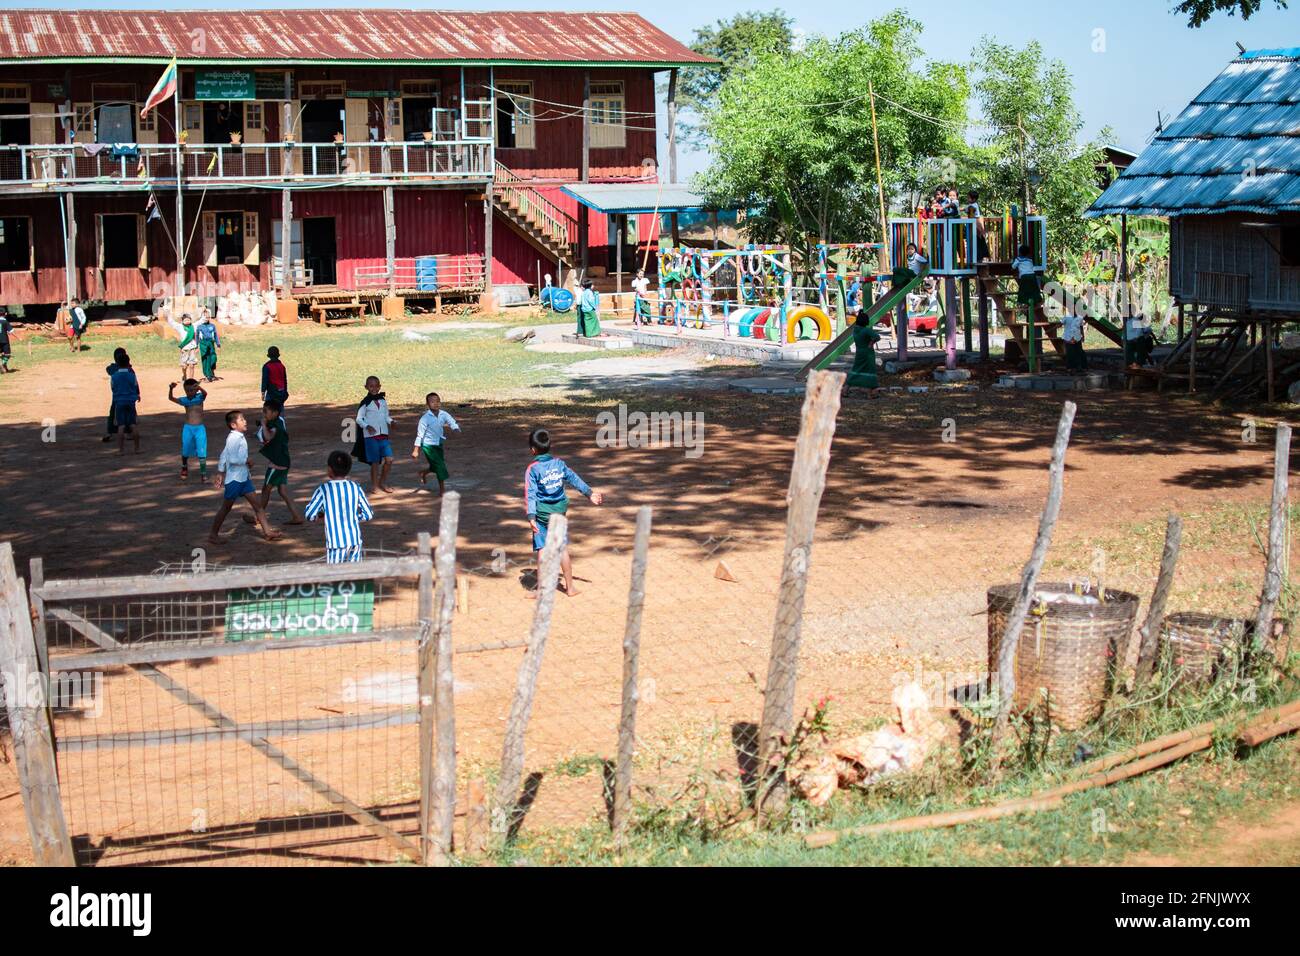 Shan state, Myanmar - January 7 2020: Kids plays outside on a playground of a rural school near Inle Lake Stock Photo